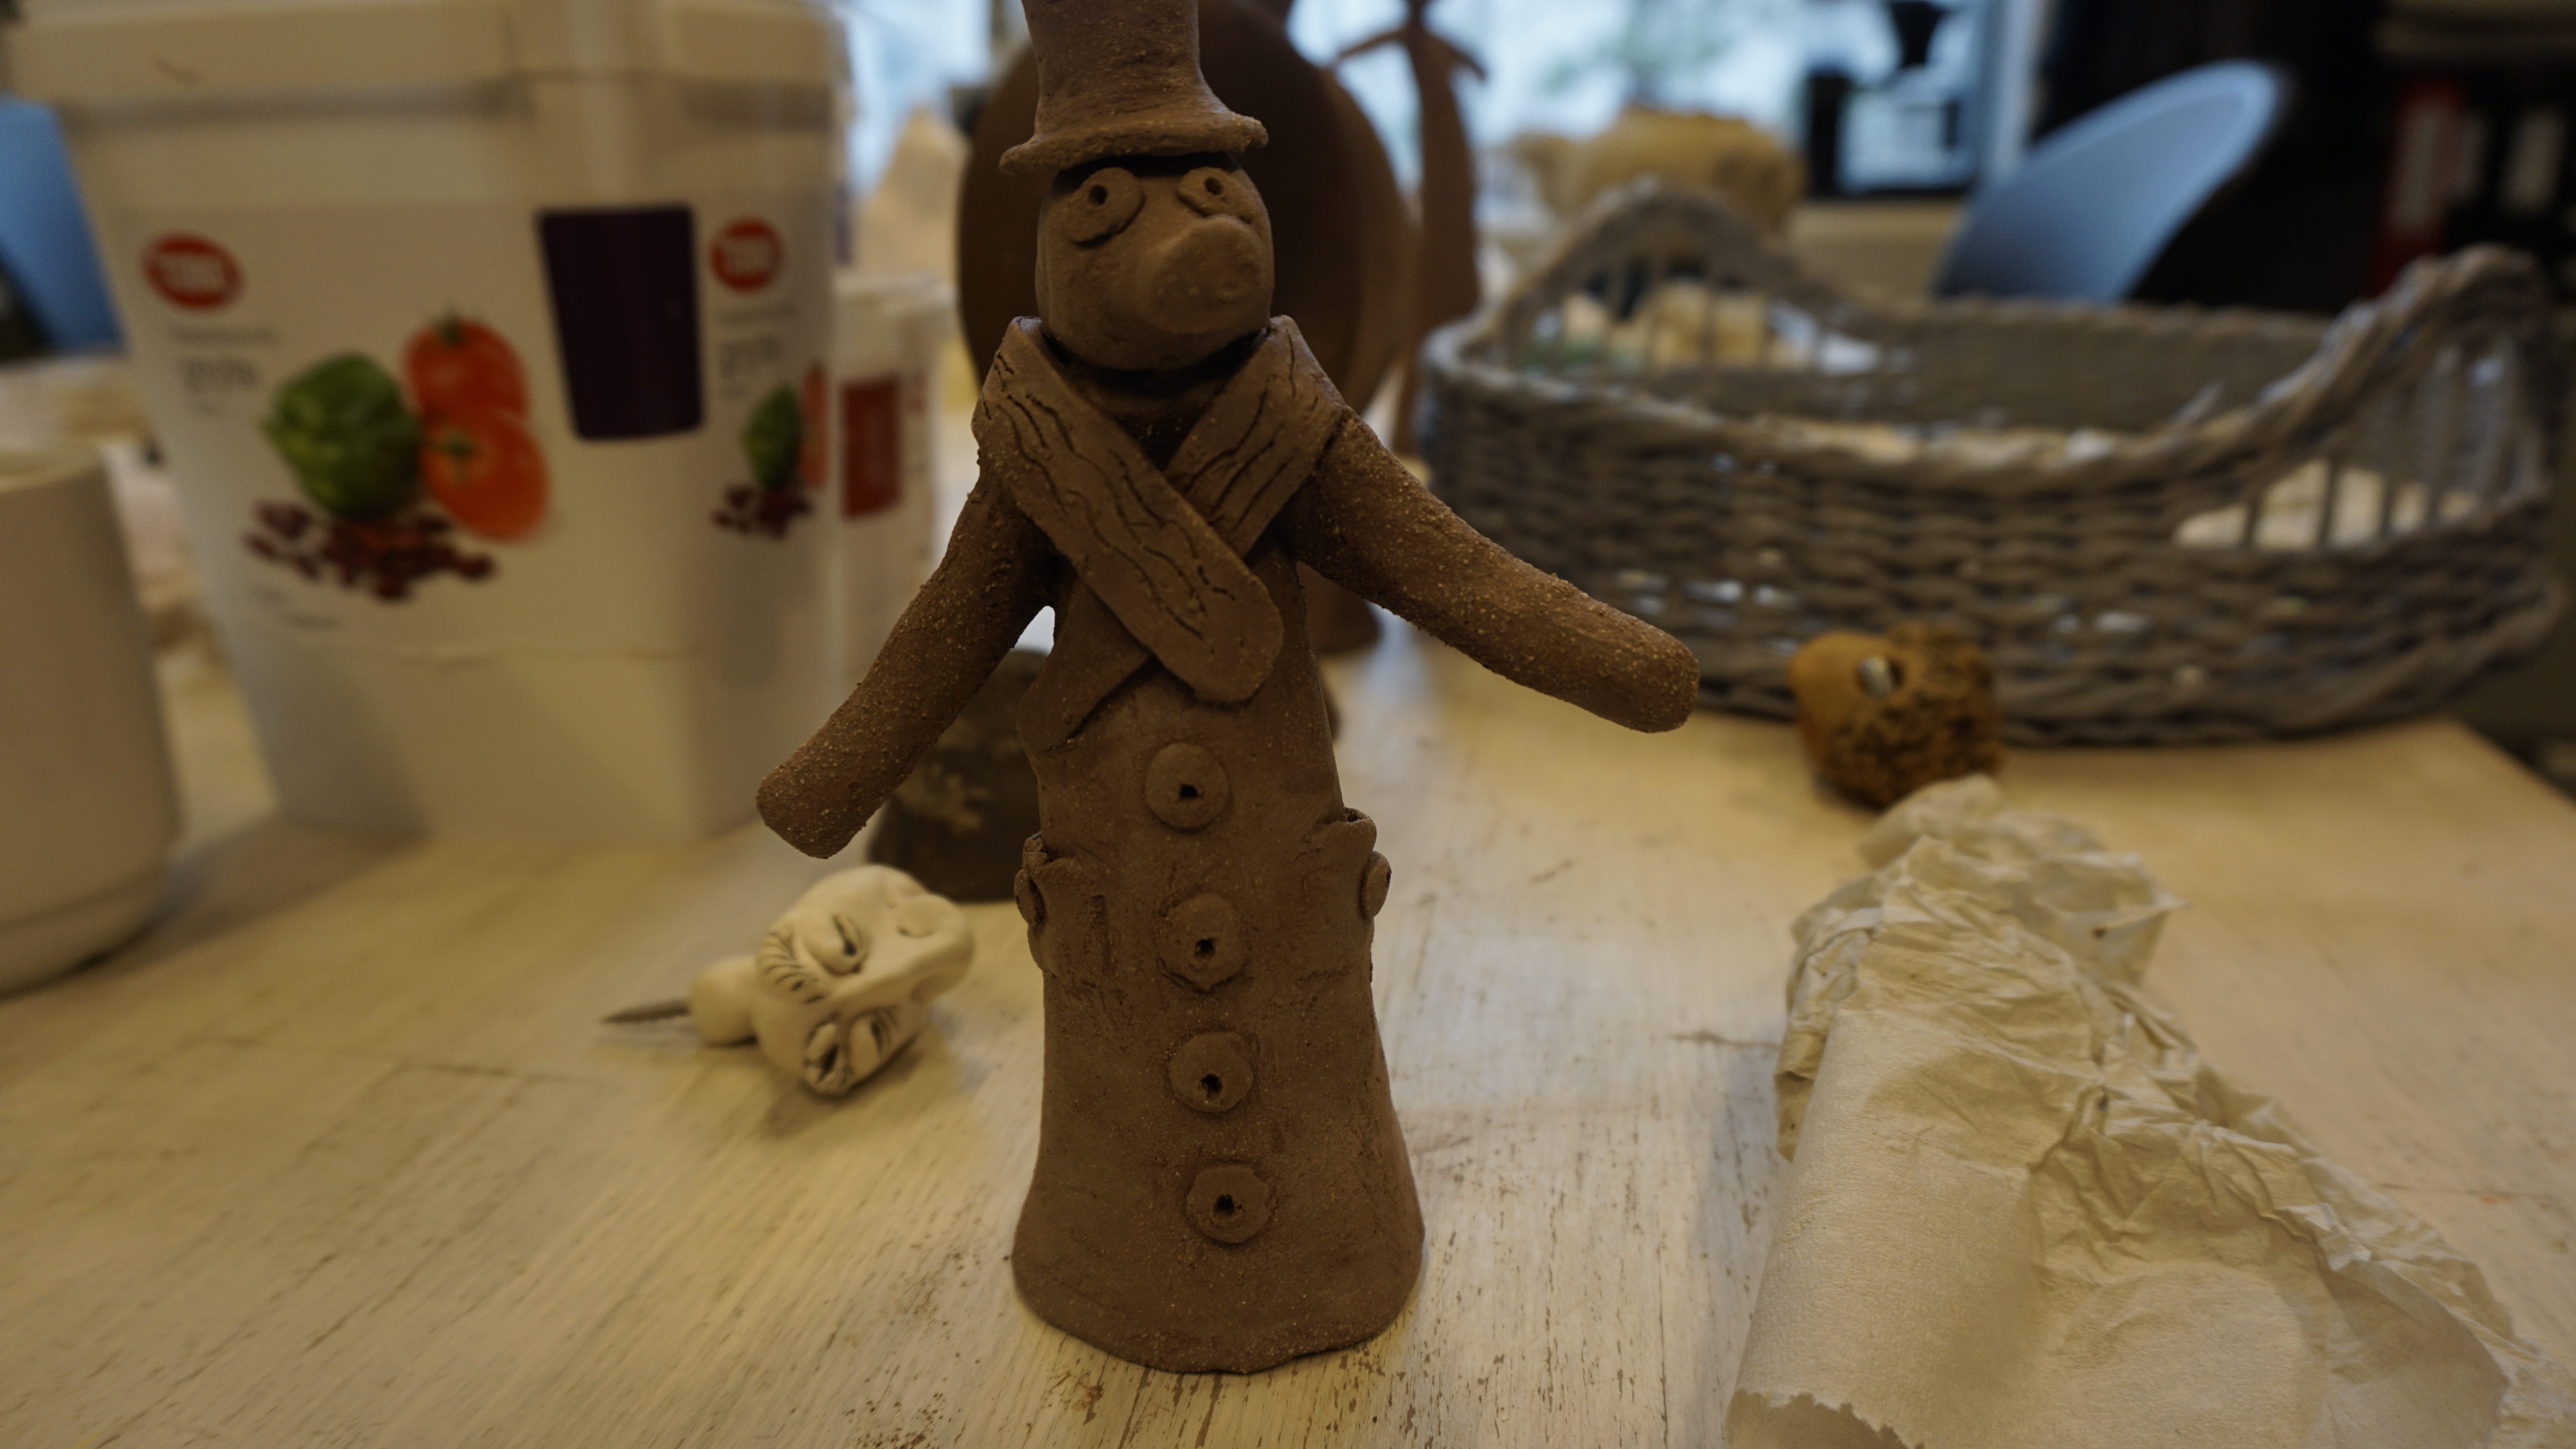 A figurine created by a prisoner out of clay in the ceramics studio at Halden Prison in Norway.